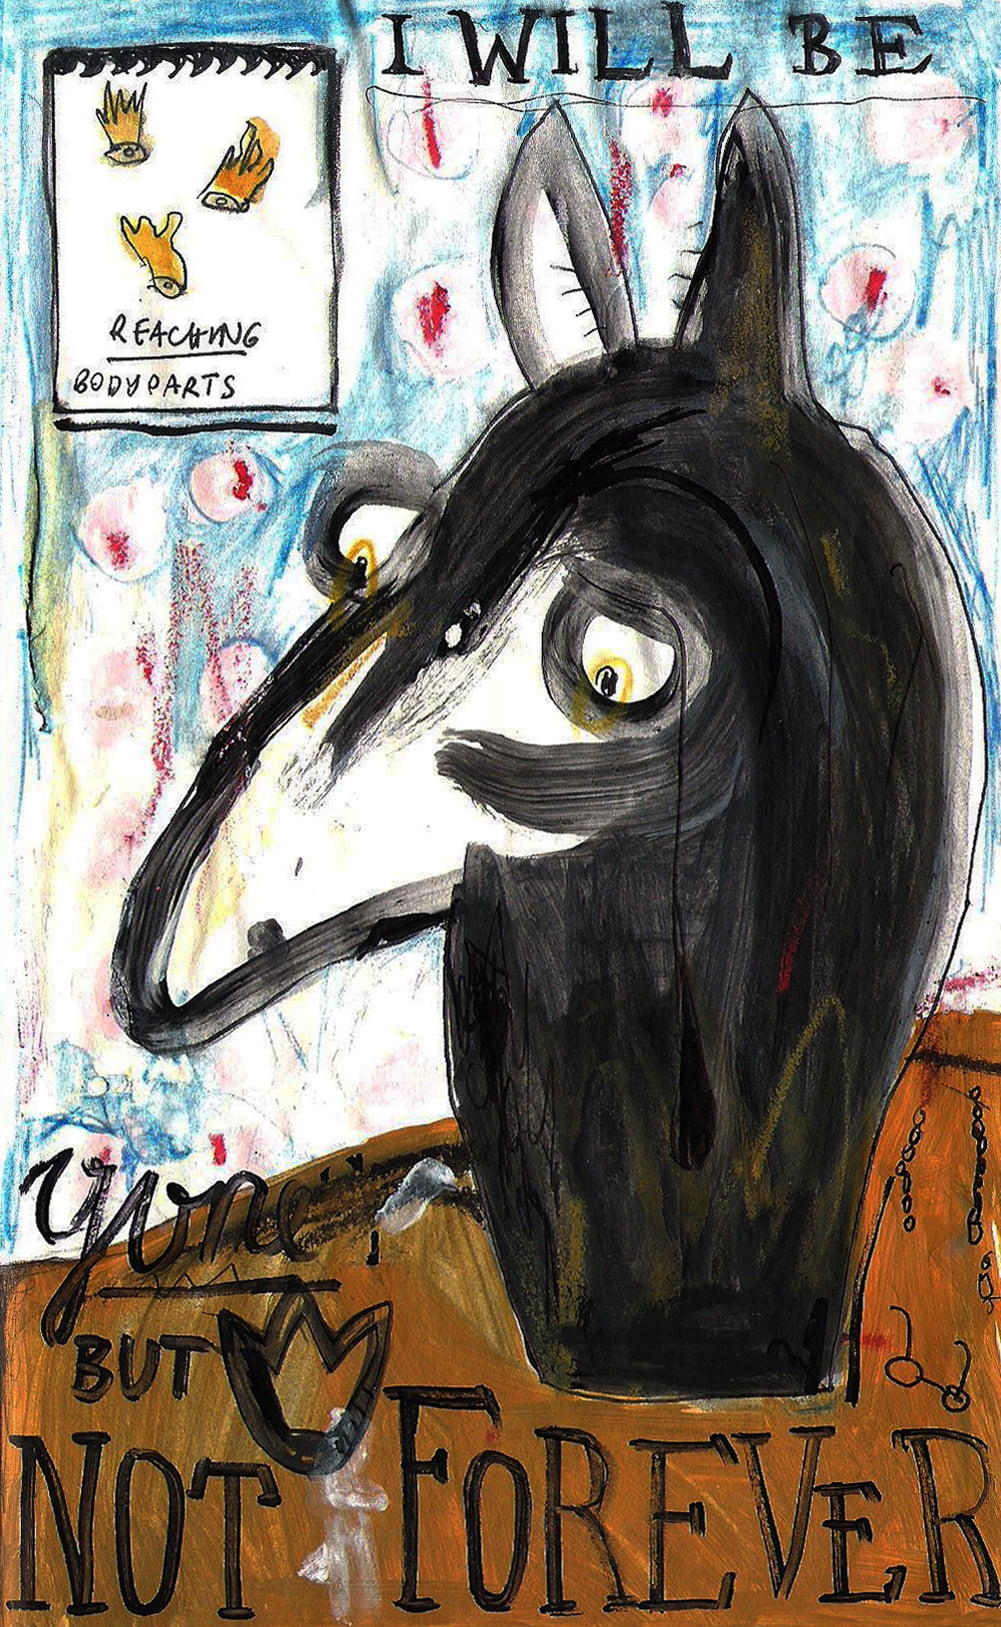 A portrait painting of acrylic and pen on paper contains a black and white horse-like head appearing from a patch of brown paint in the centre of the page. Around this head on a blue and red scribbled background reads the words: “I will be gone BUT NOT FOREVER”. In the top left corner is a small white box with three amber eye-like drawings “REACHING BODYPARTS”.